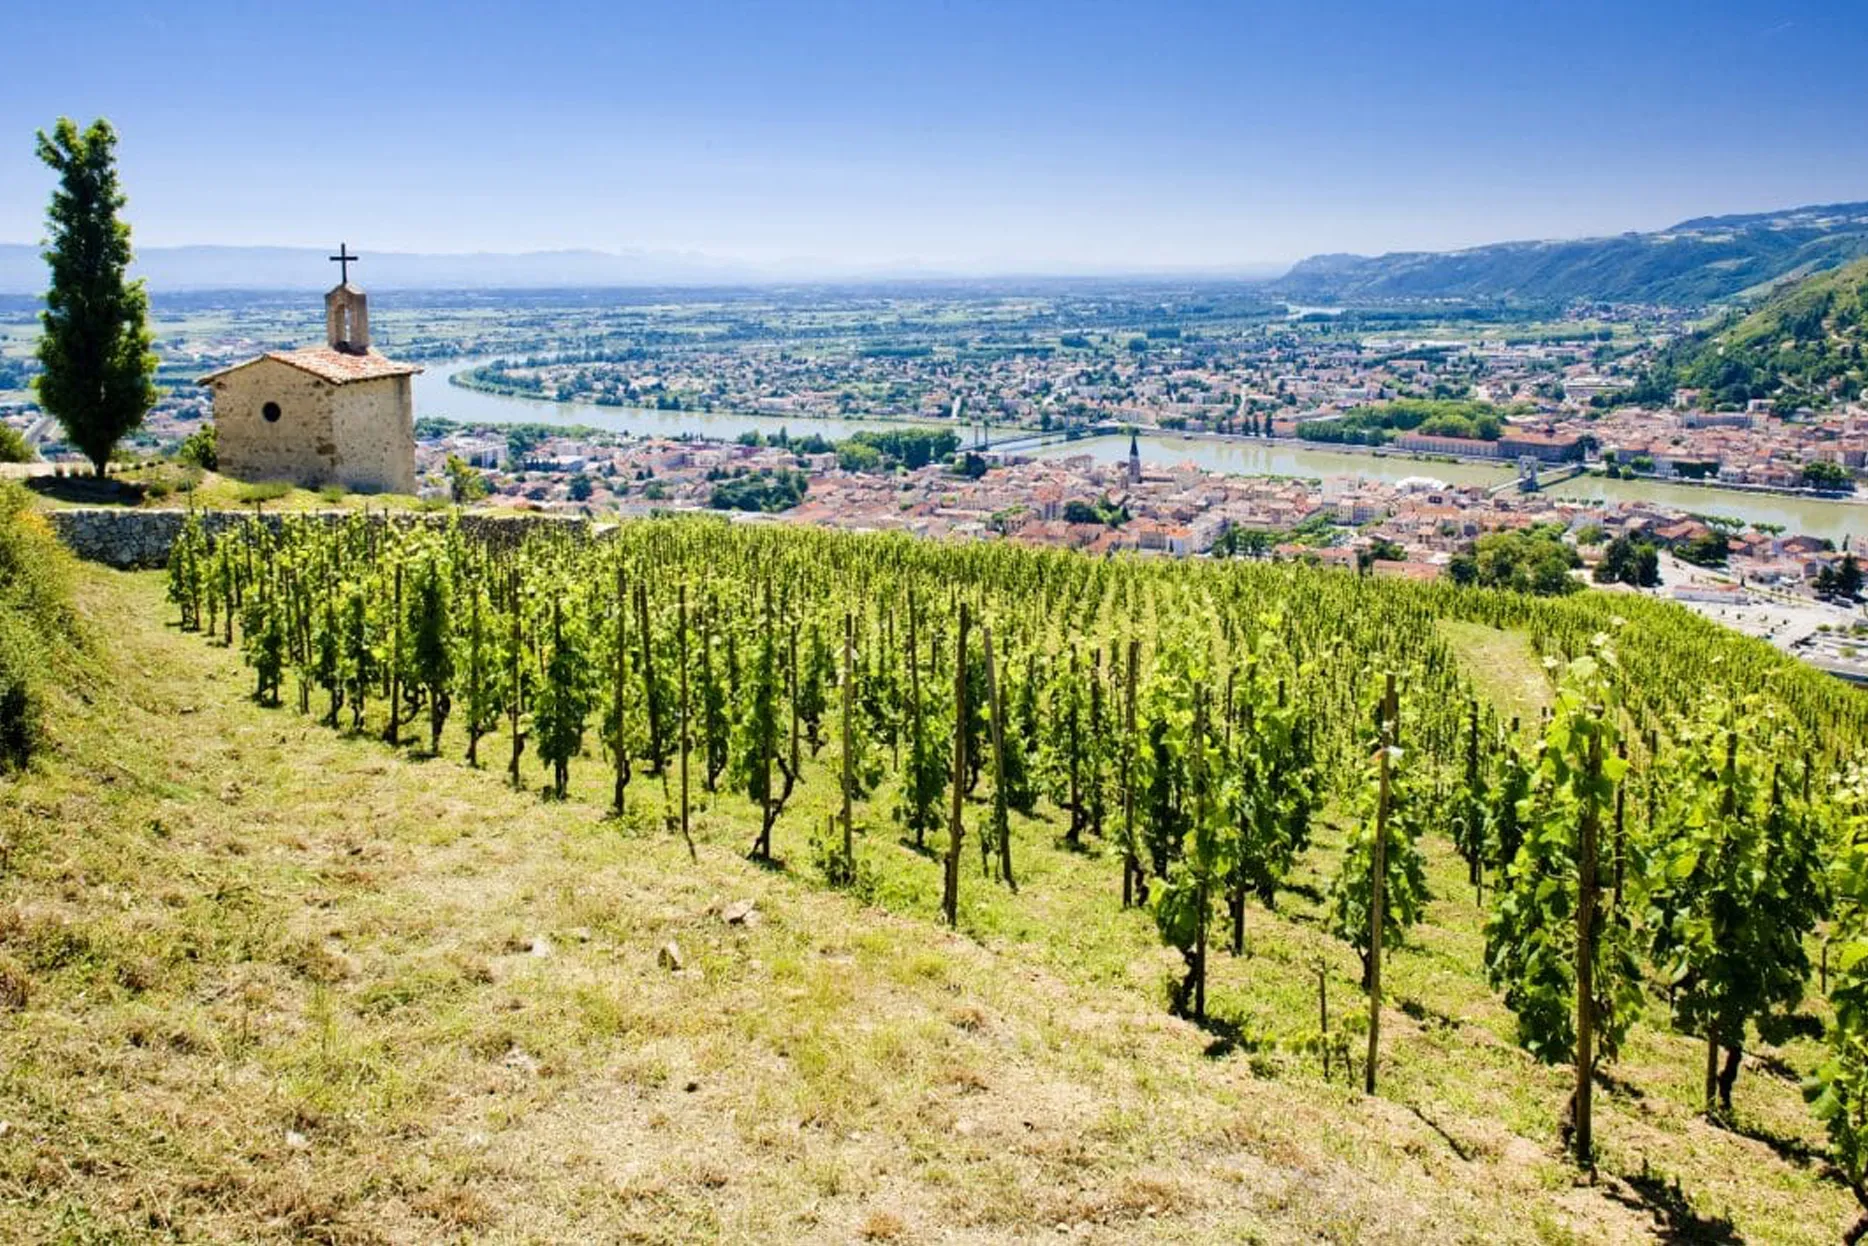 Views from a vineyard overlooking the Rhône Valley and River in France